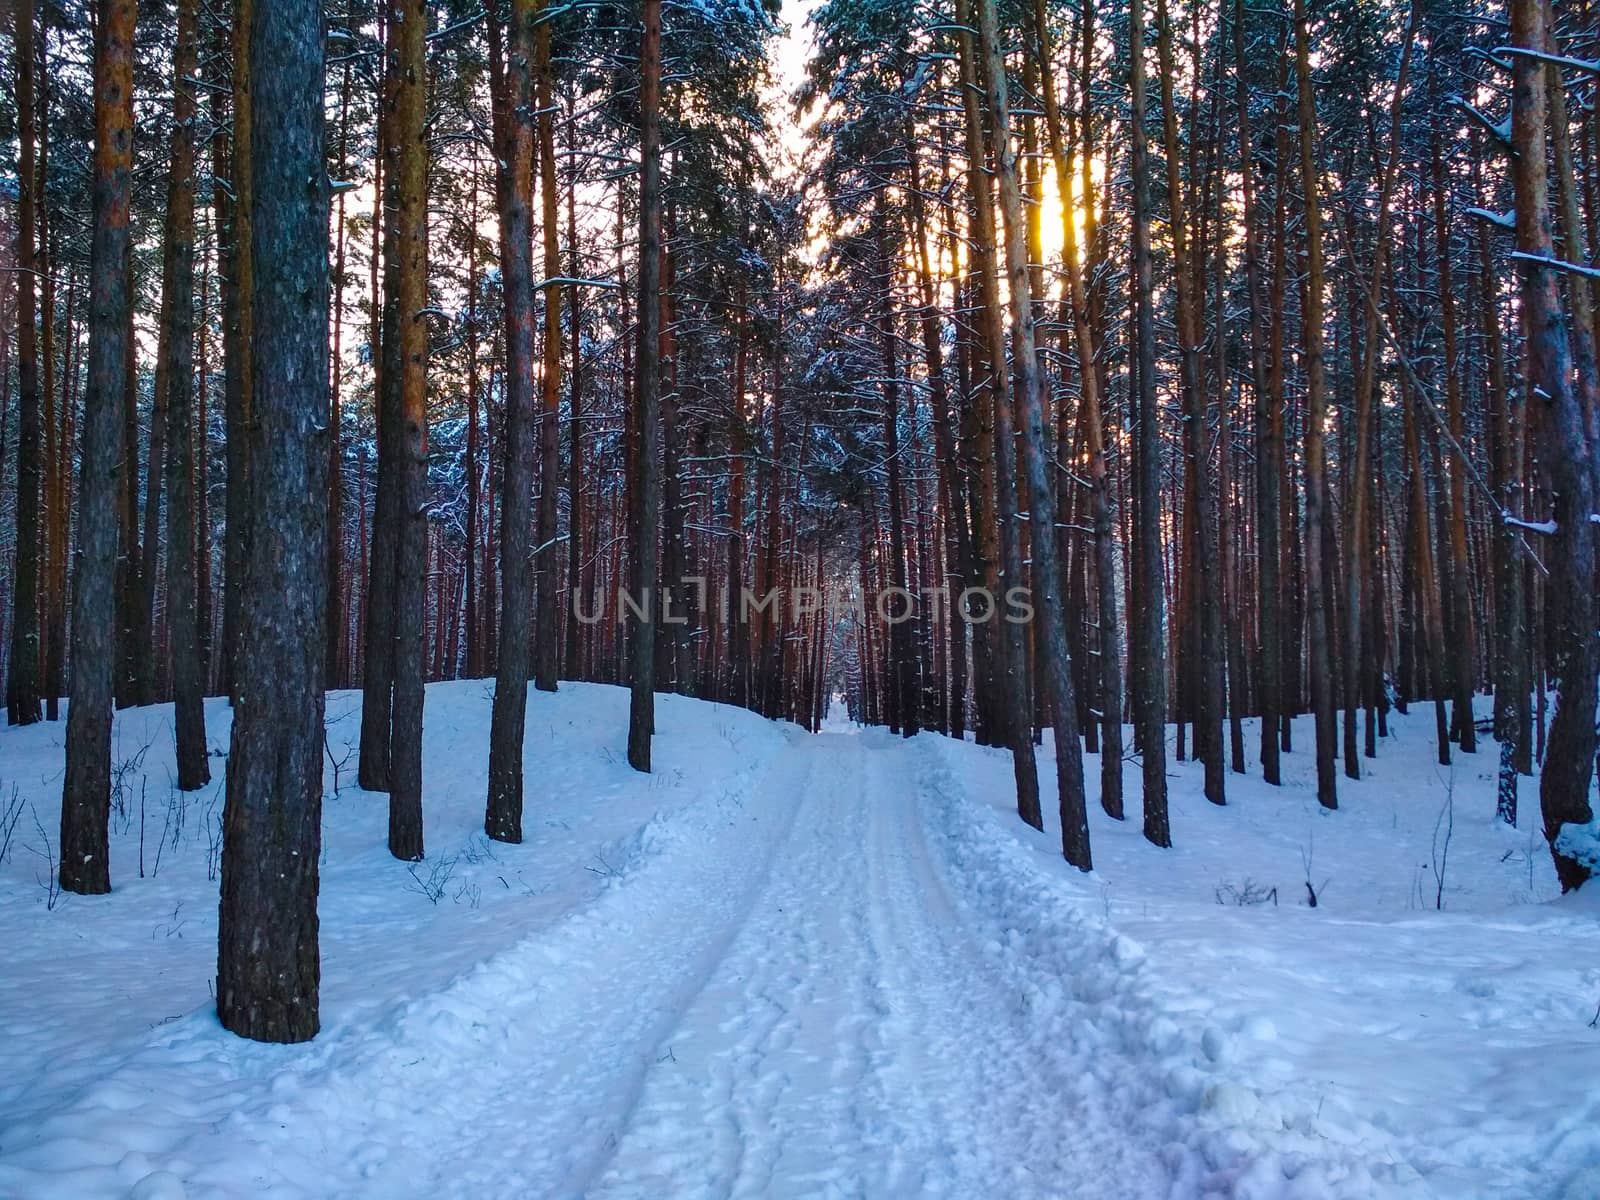 An empty snow-covered country road through the pine tree forest at sunset. Sunlight through the trees. Winter driving